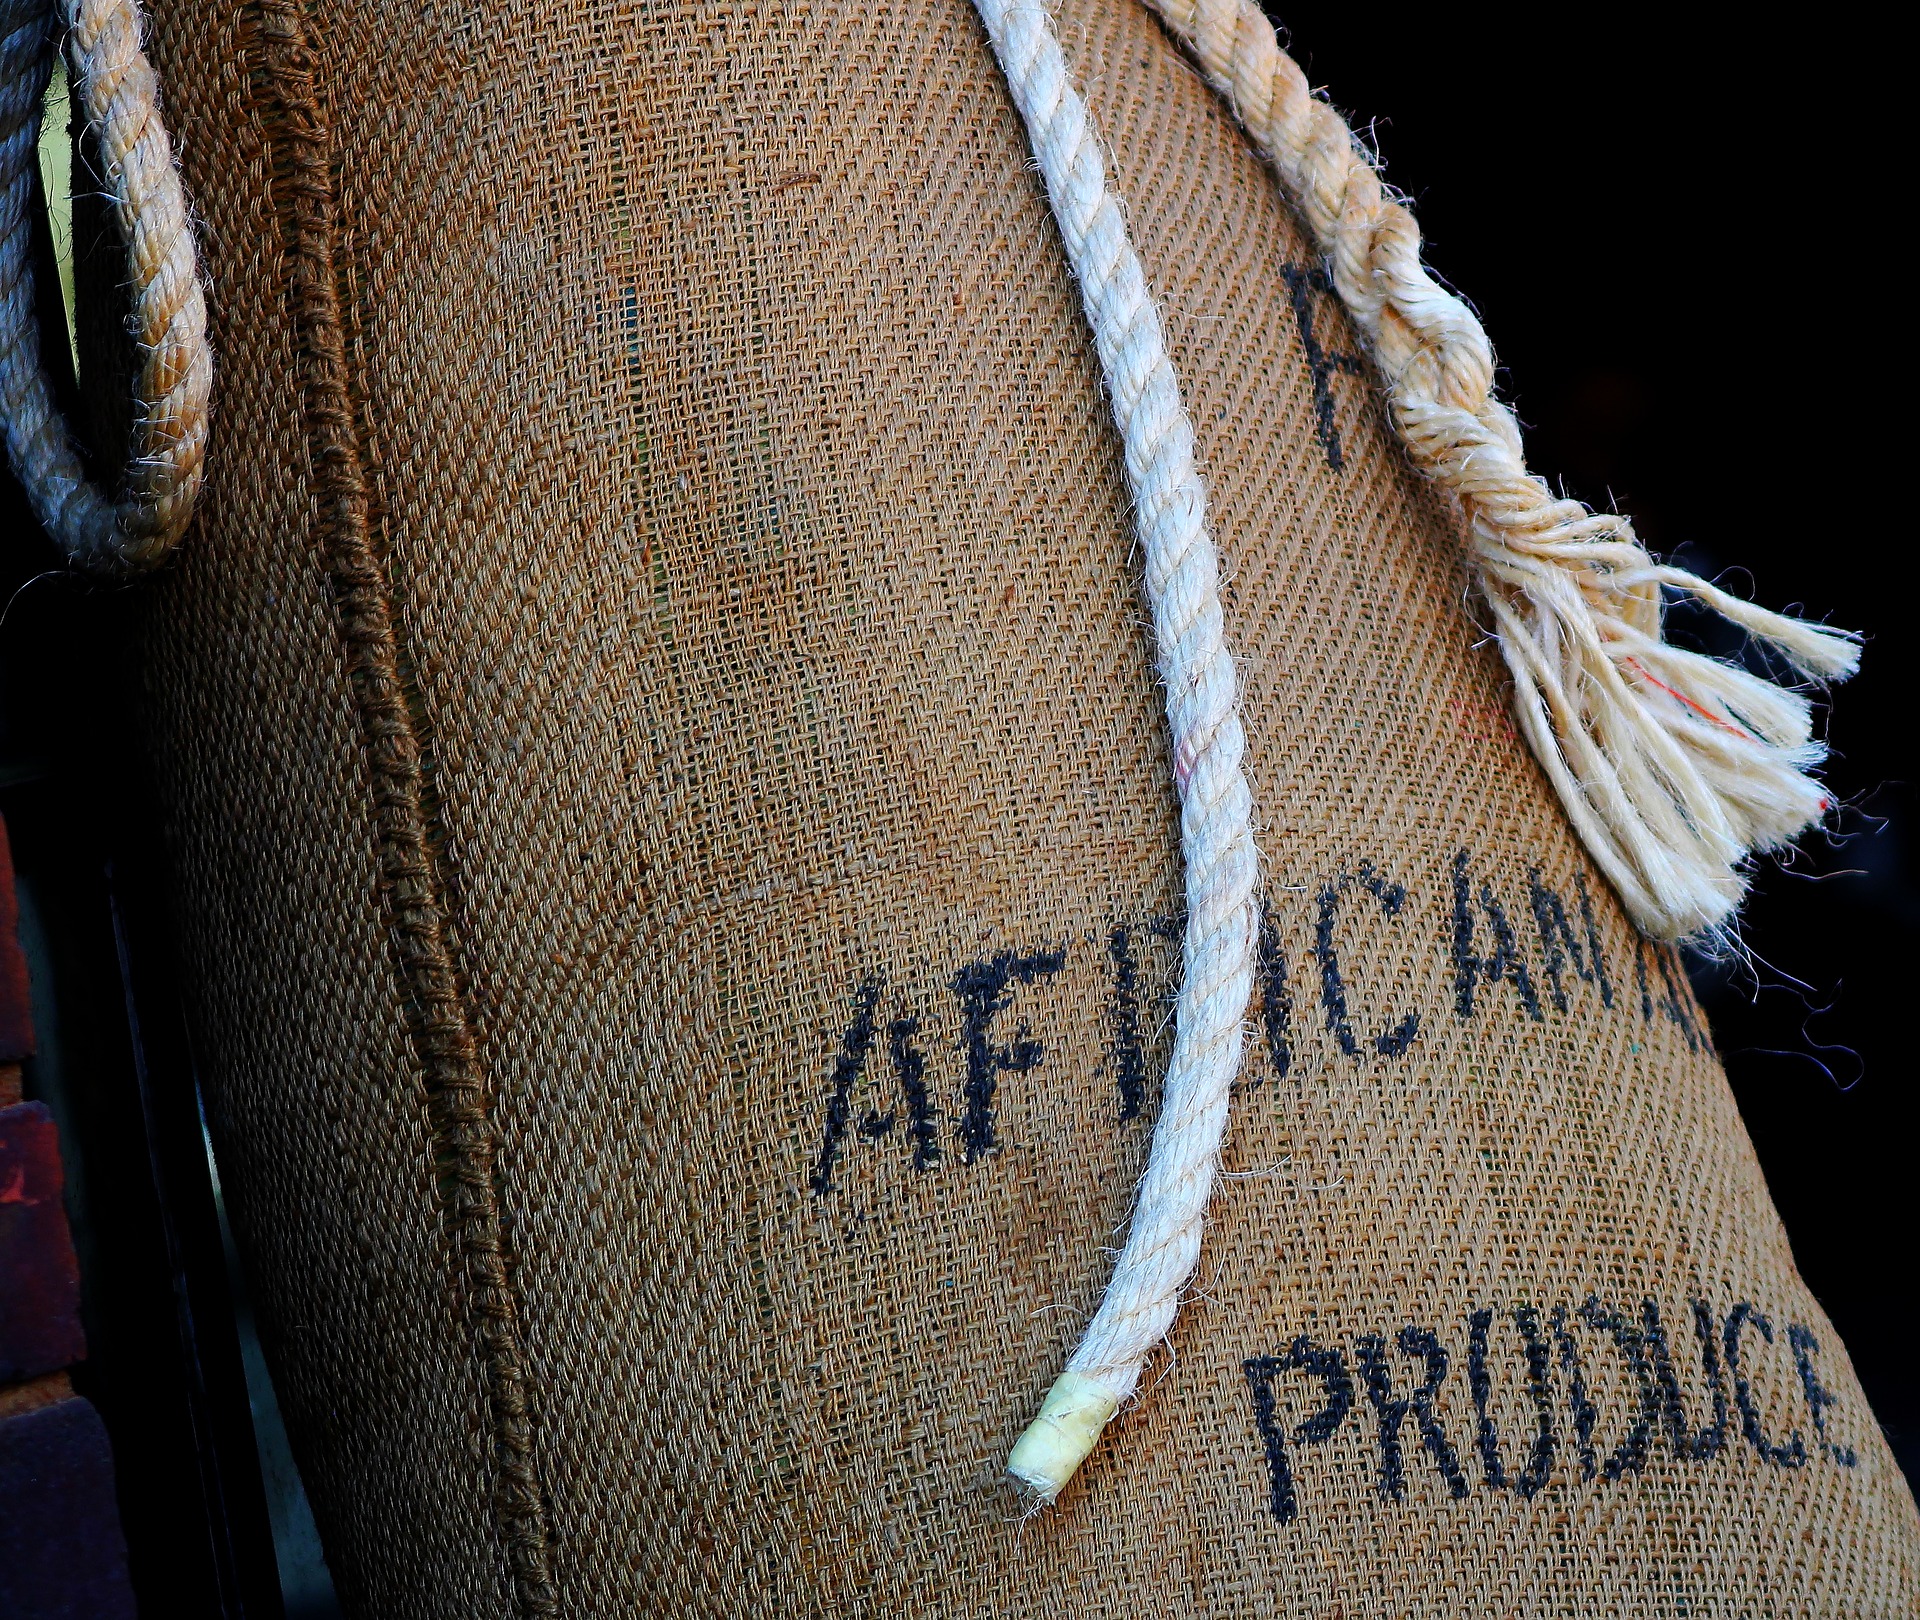 Sack of African coffee beans